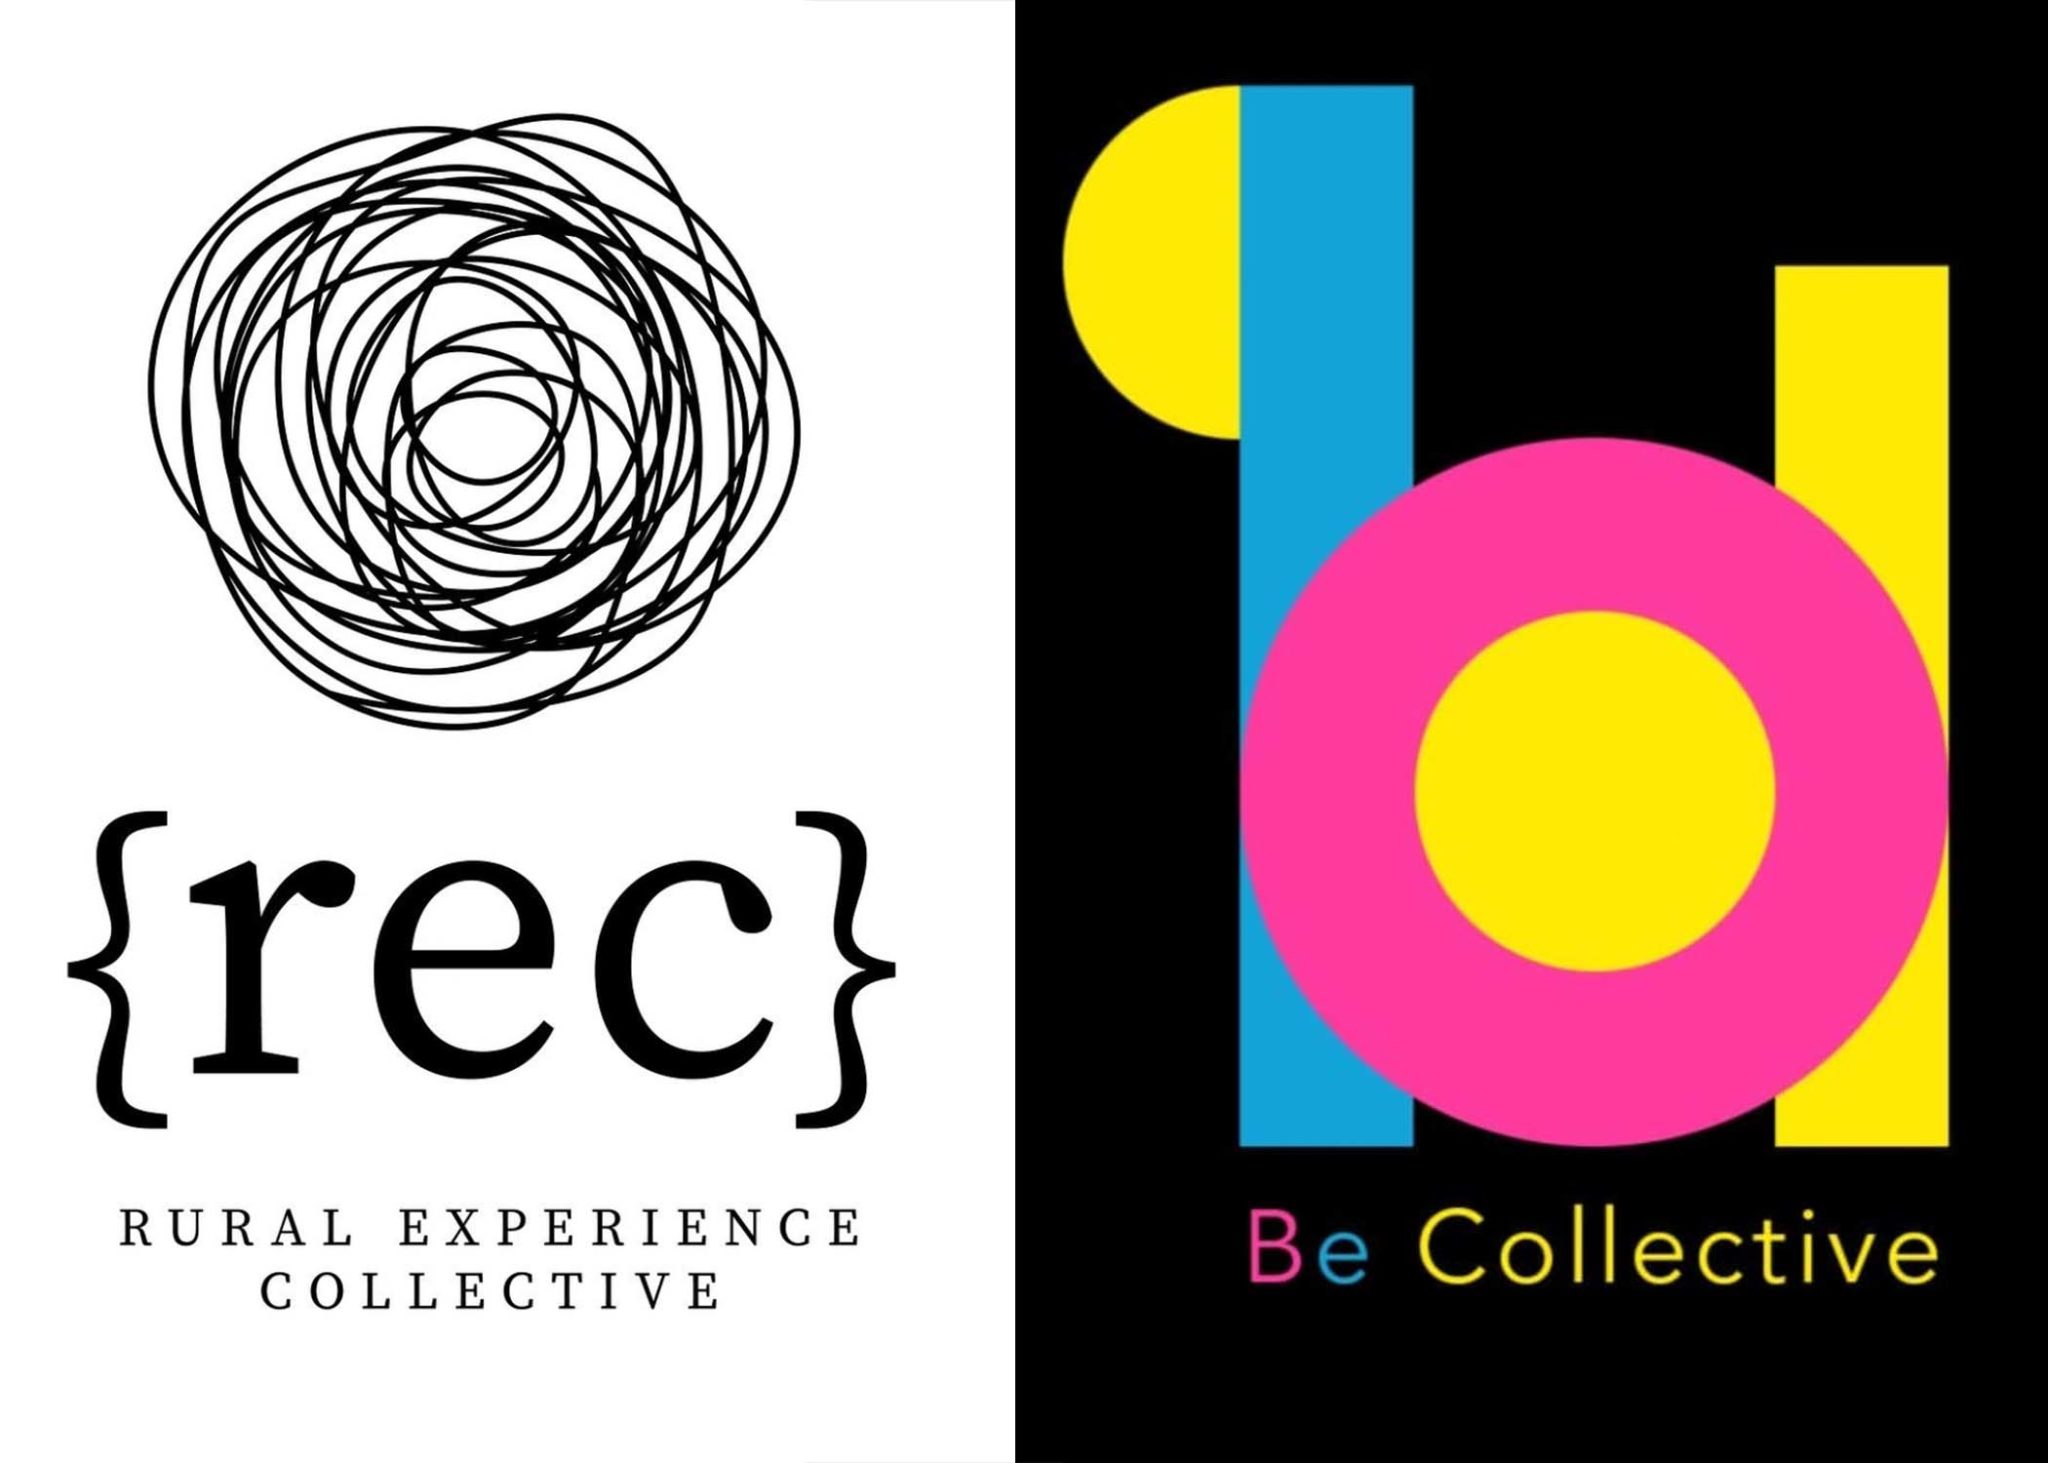 Collaborative Practices Award / Rural Experience Collective and Be Collective